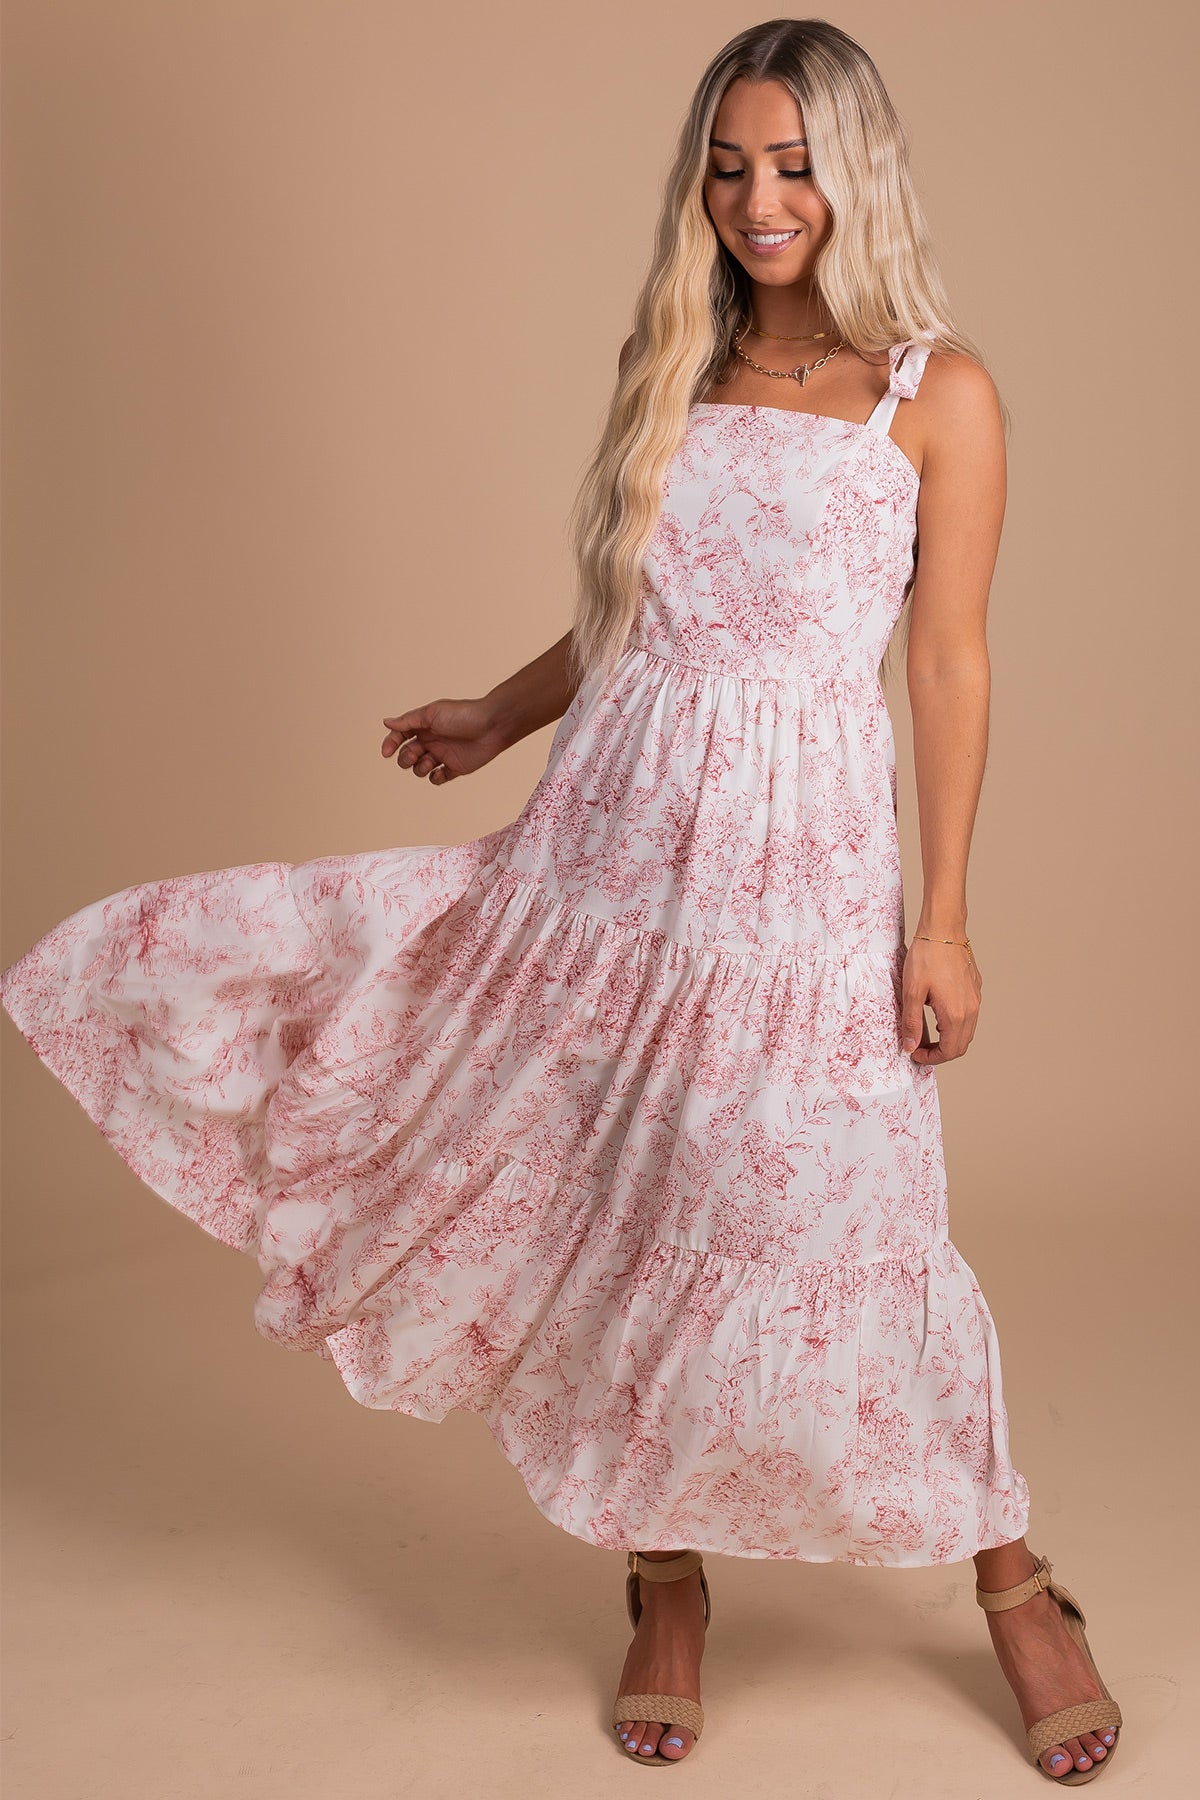 Women's Maxi Dress with Floral Print in White and Red